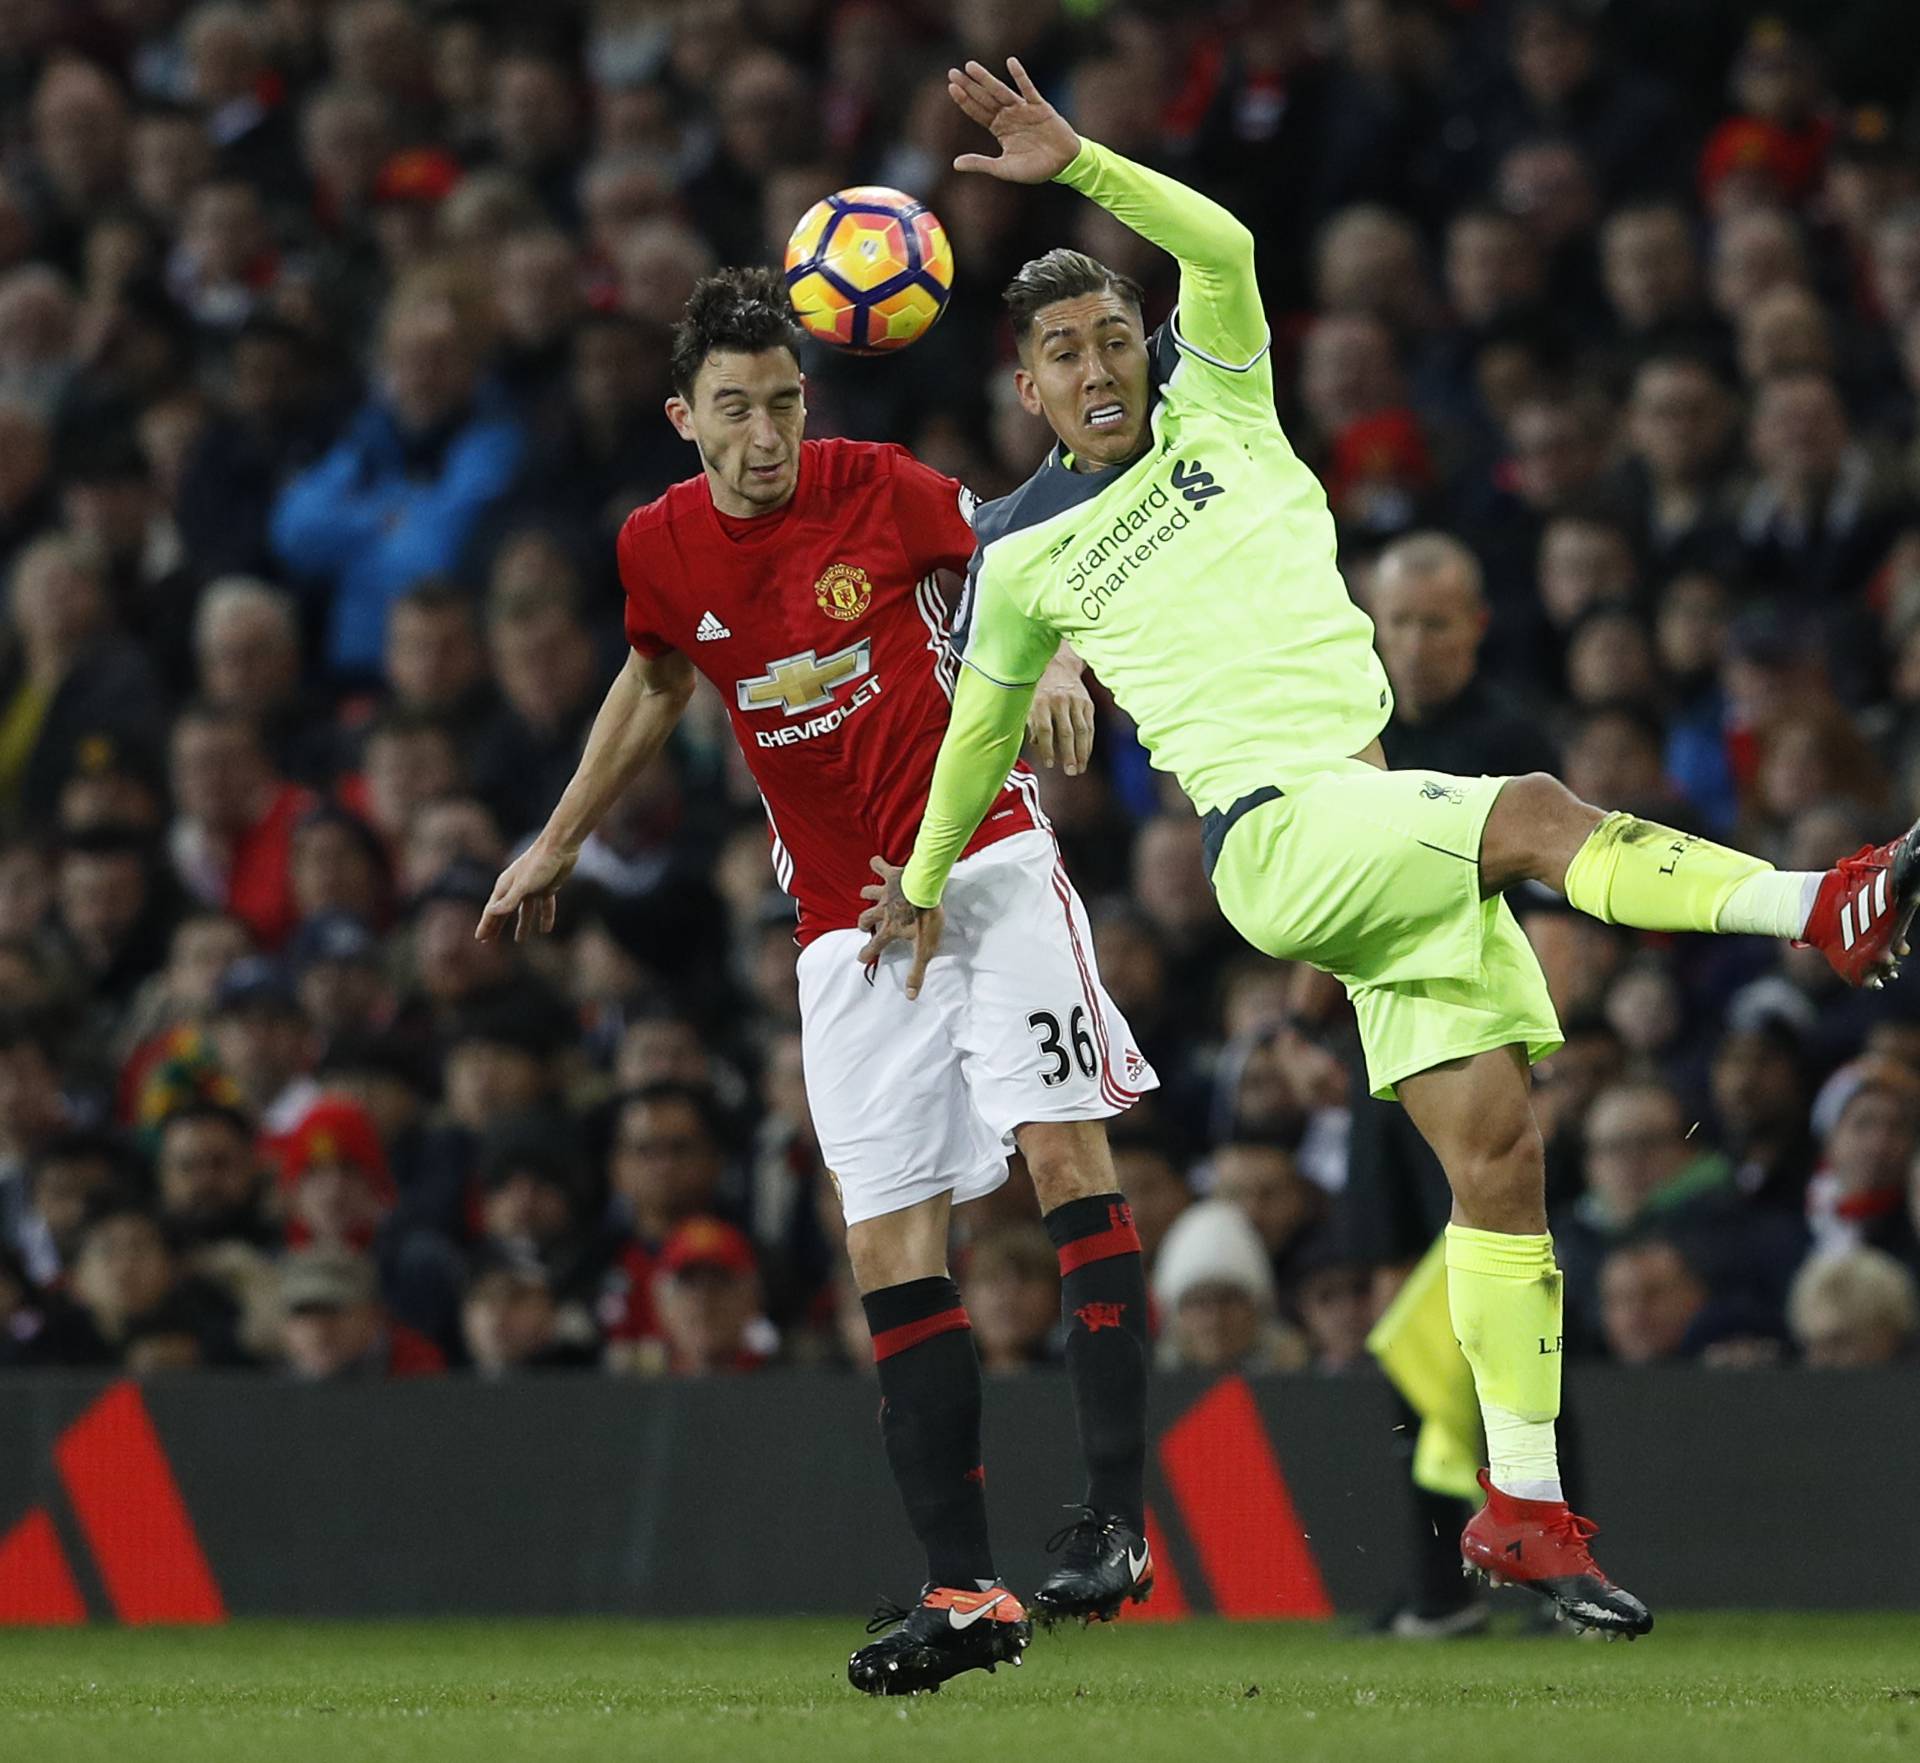 Manchester United's Matteo Darmian in action with Liverpool's Roberto Firmino